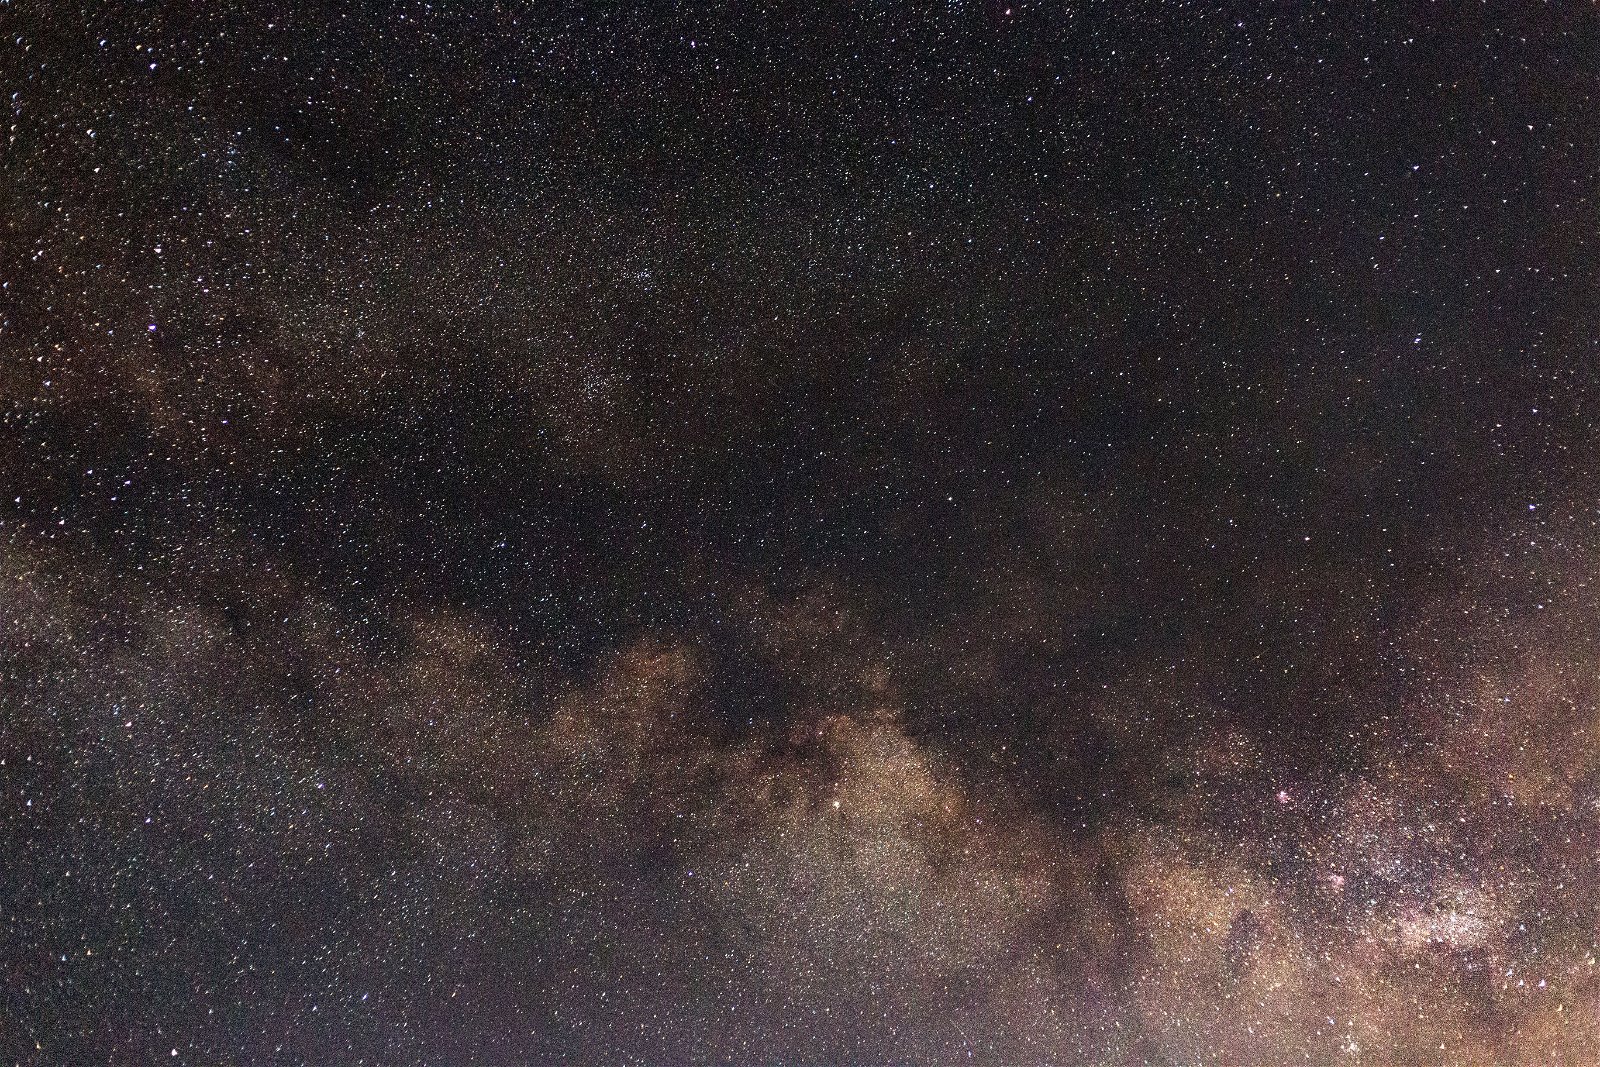 A Milky Way image of the night sky with stars as an example of astrophotography